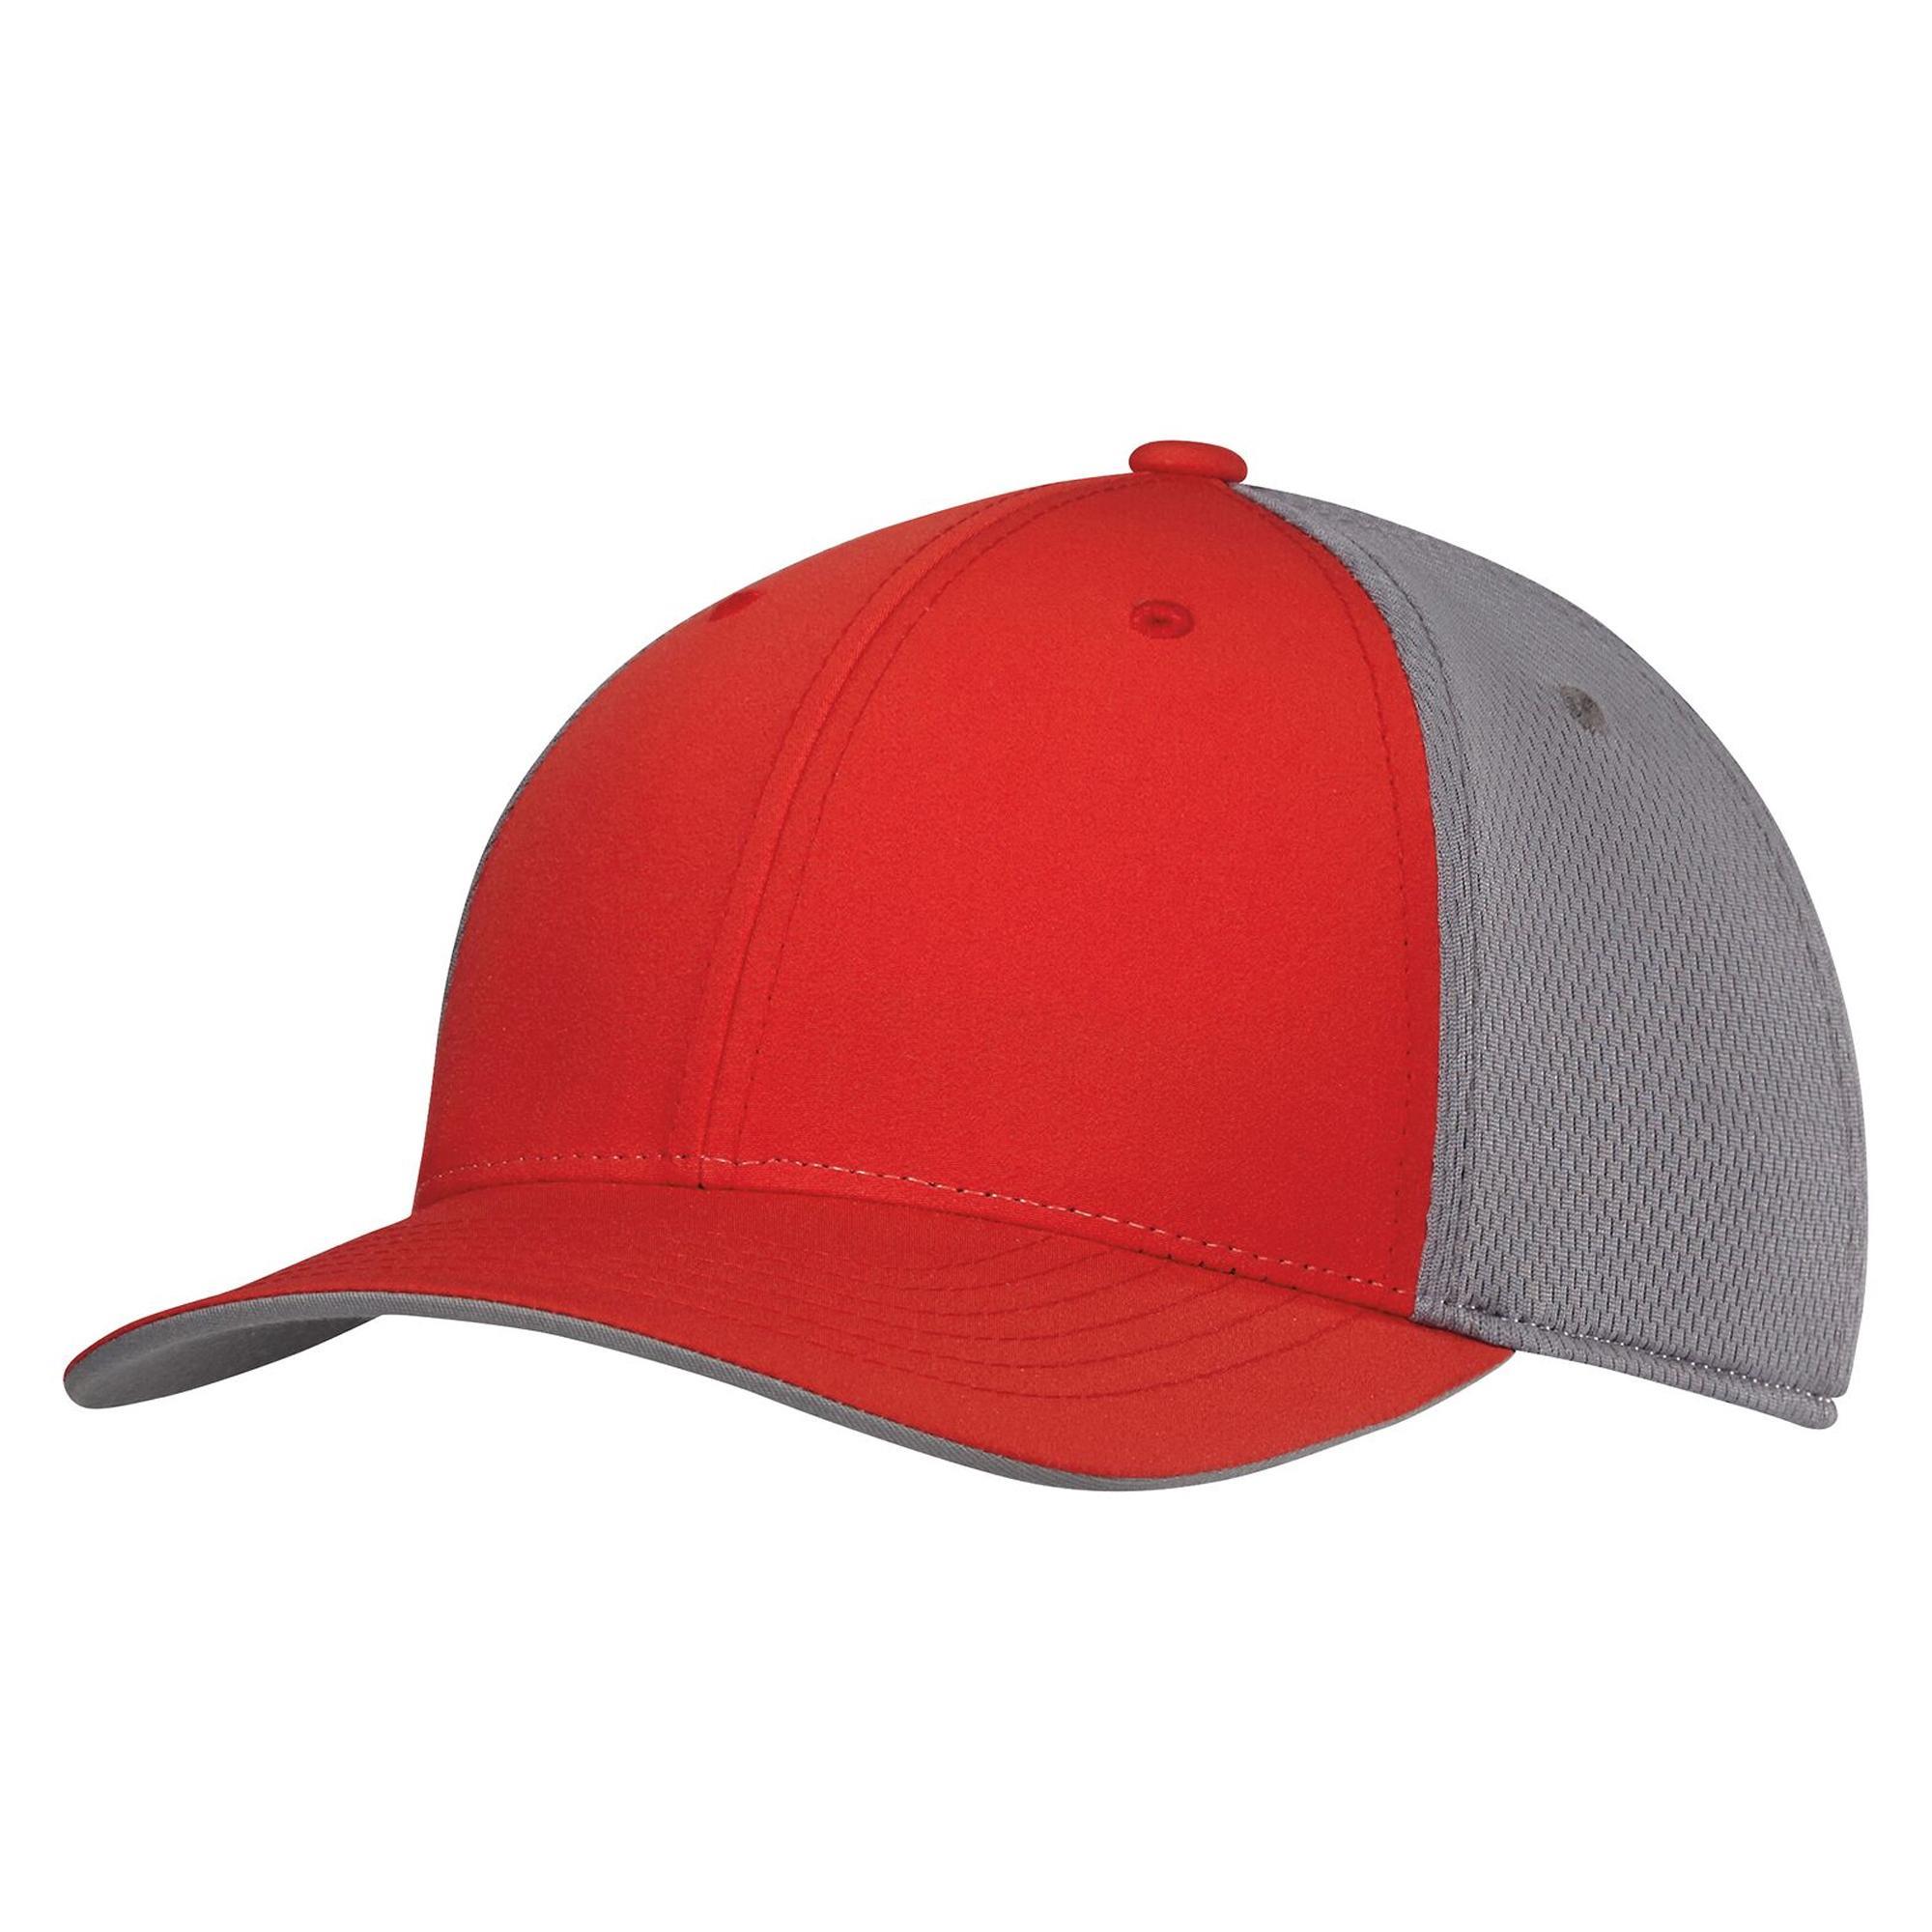 Adidas Unisex Adults ClimaCool Tour Crestable Cap (High-Res Red) (S/M)